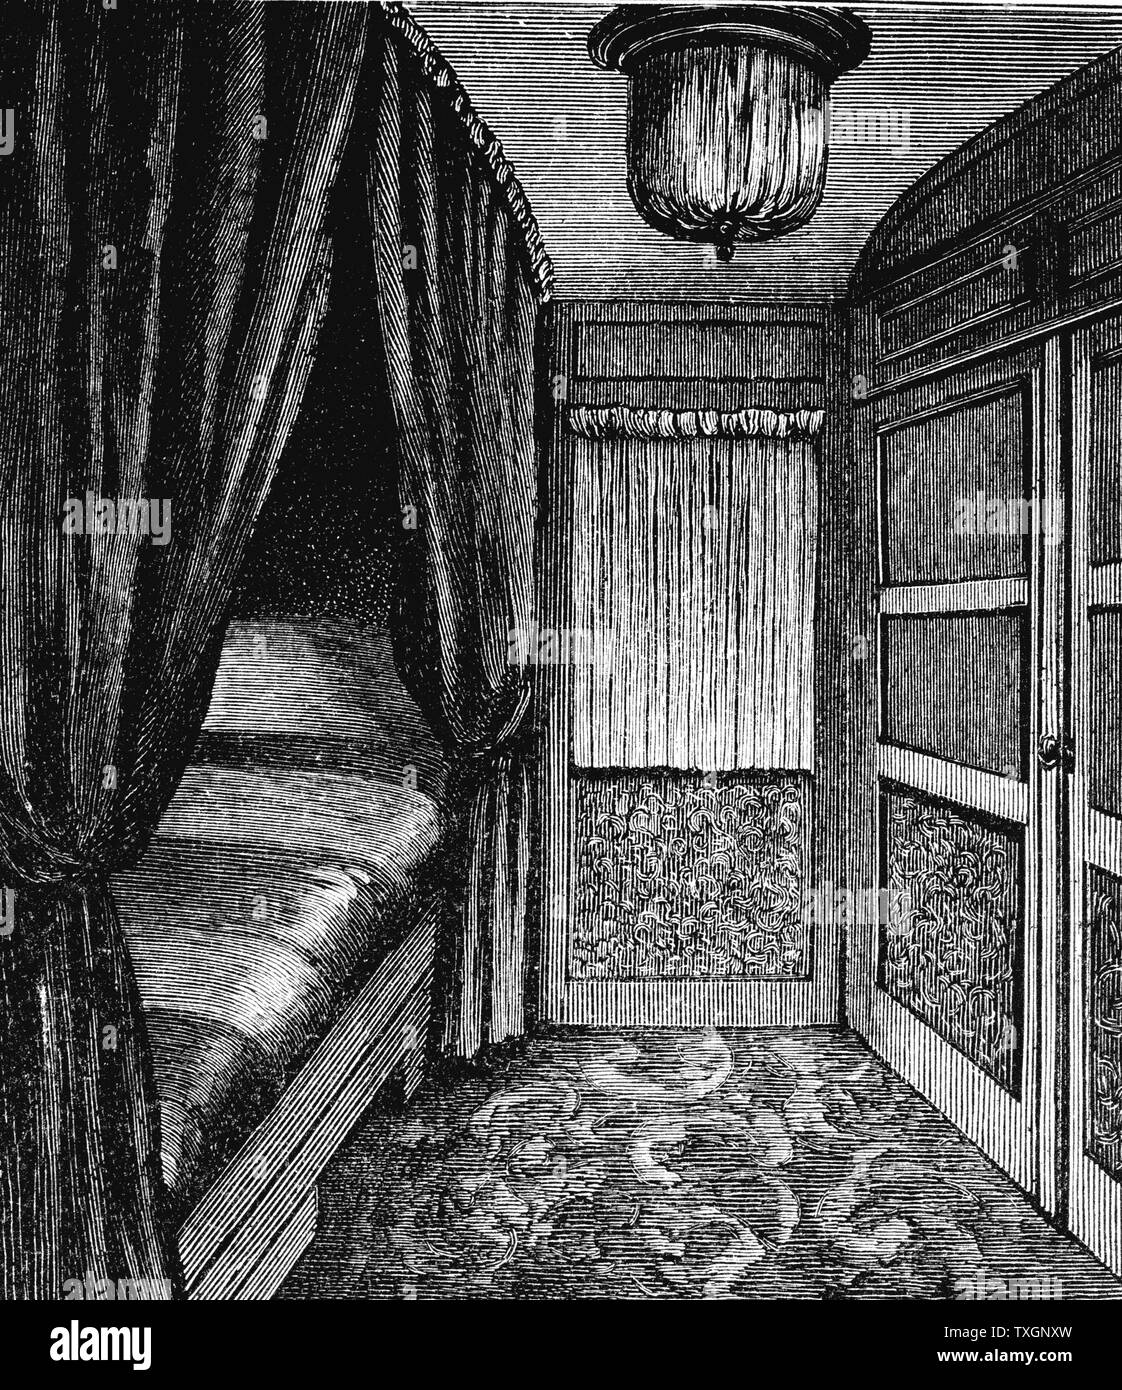 Sleeping compartment on the Orient Express.  c.1895 Wood engraving  Leipzig Stock Photo